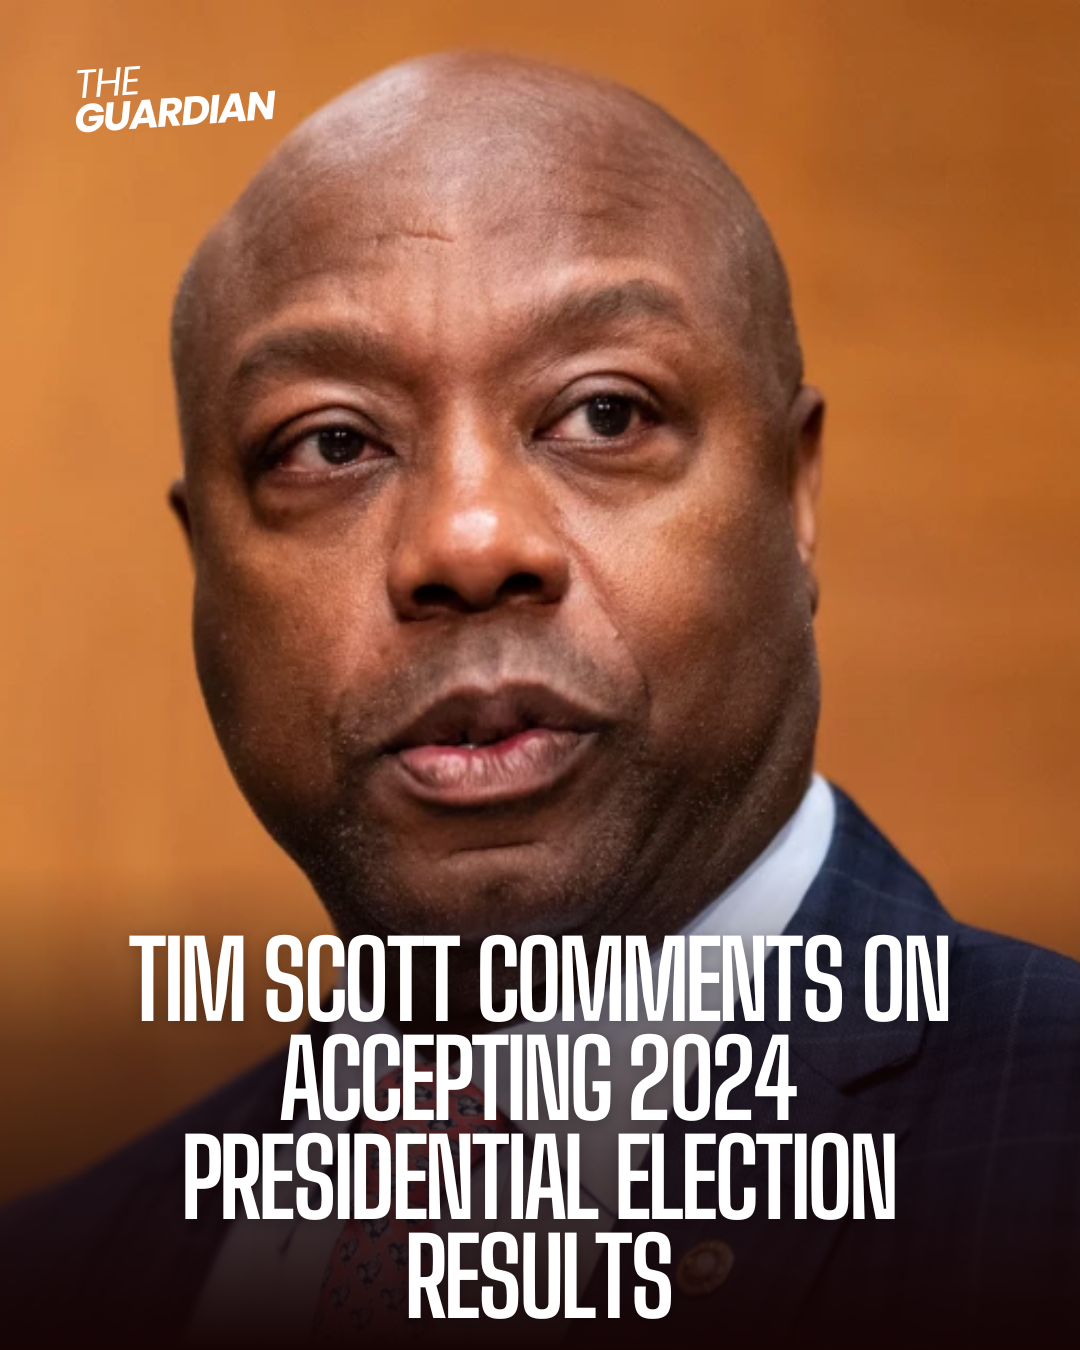 Senator Tim Scott of South Carolina was asked whether he would accept the results of the 2024 presidential election.